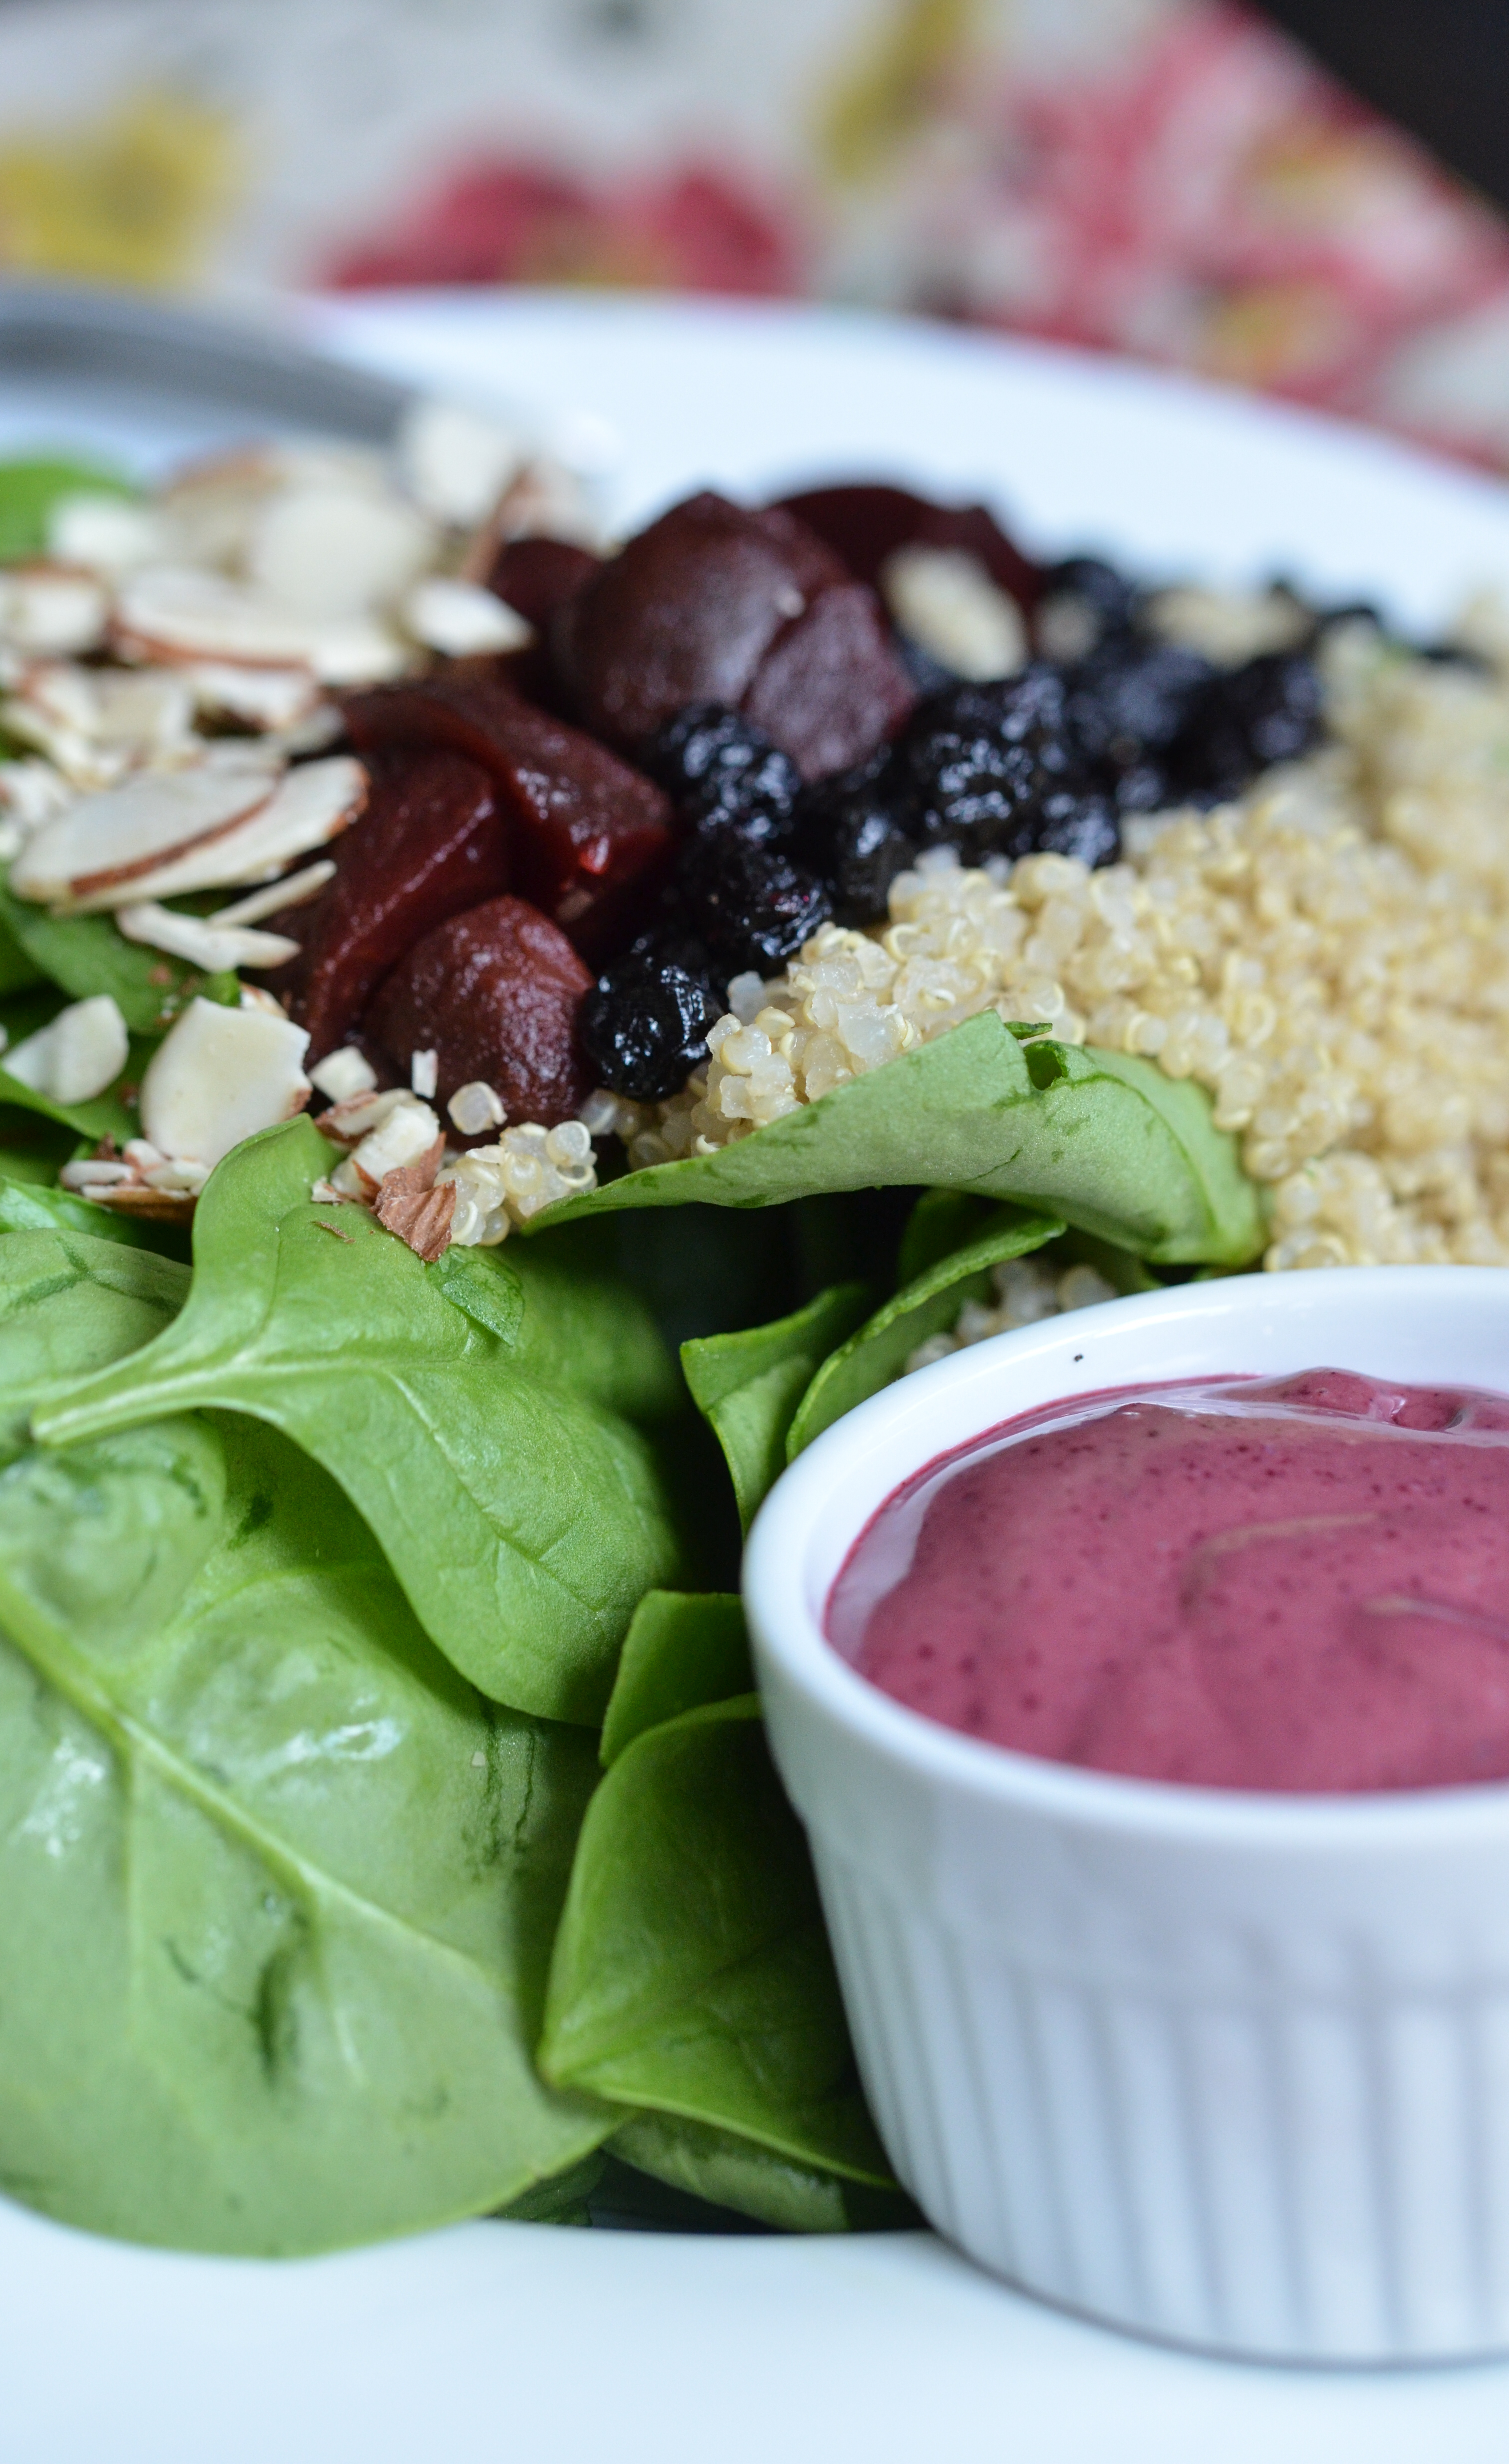 A side of blueberry vinaigrette with a spinach and beet salad.